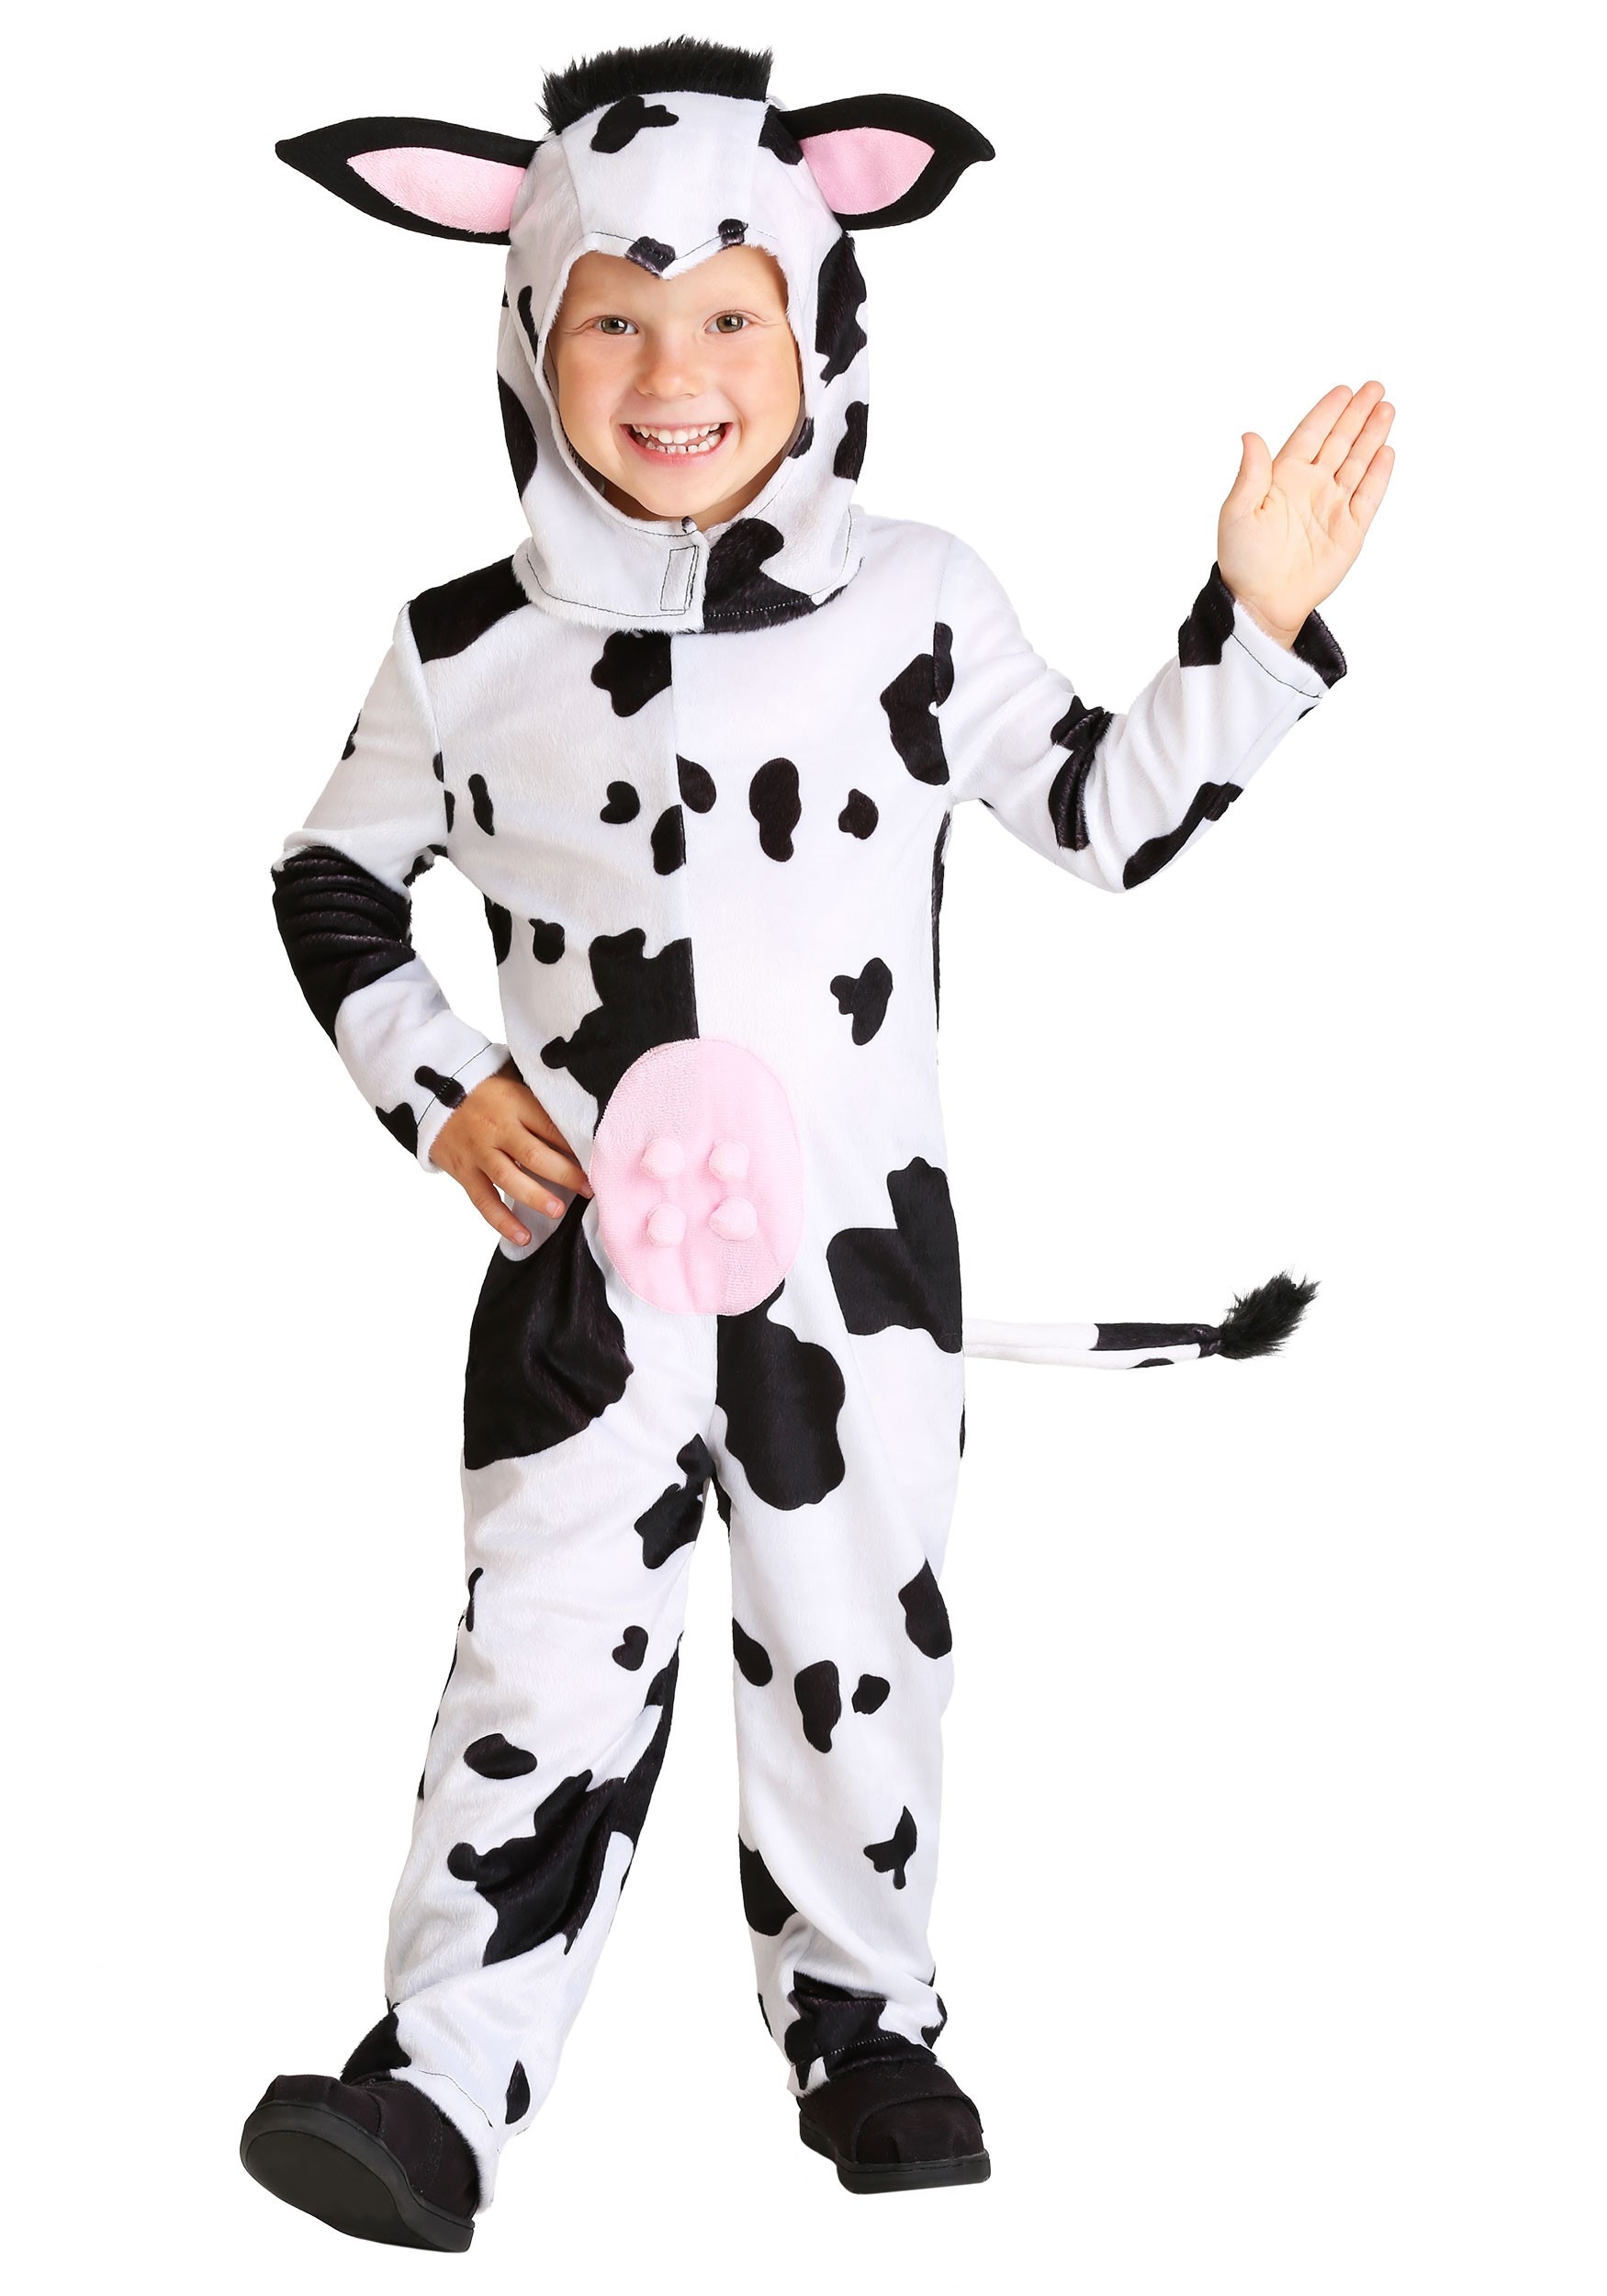 Photos - Fancy Dress Classic FUN Costumes  Cow Costume for Toddlers | Kid's Farm Animal Costumes 